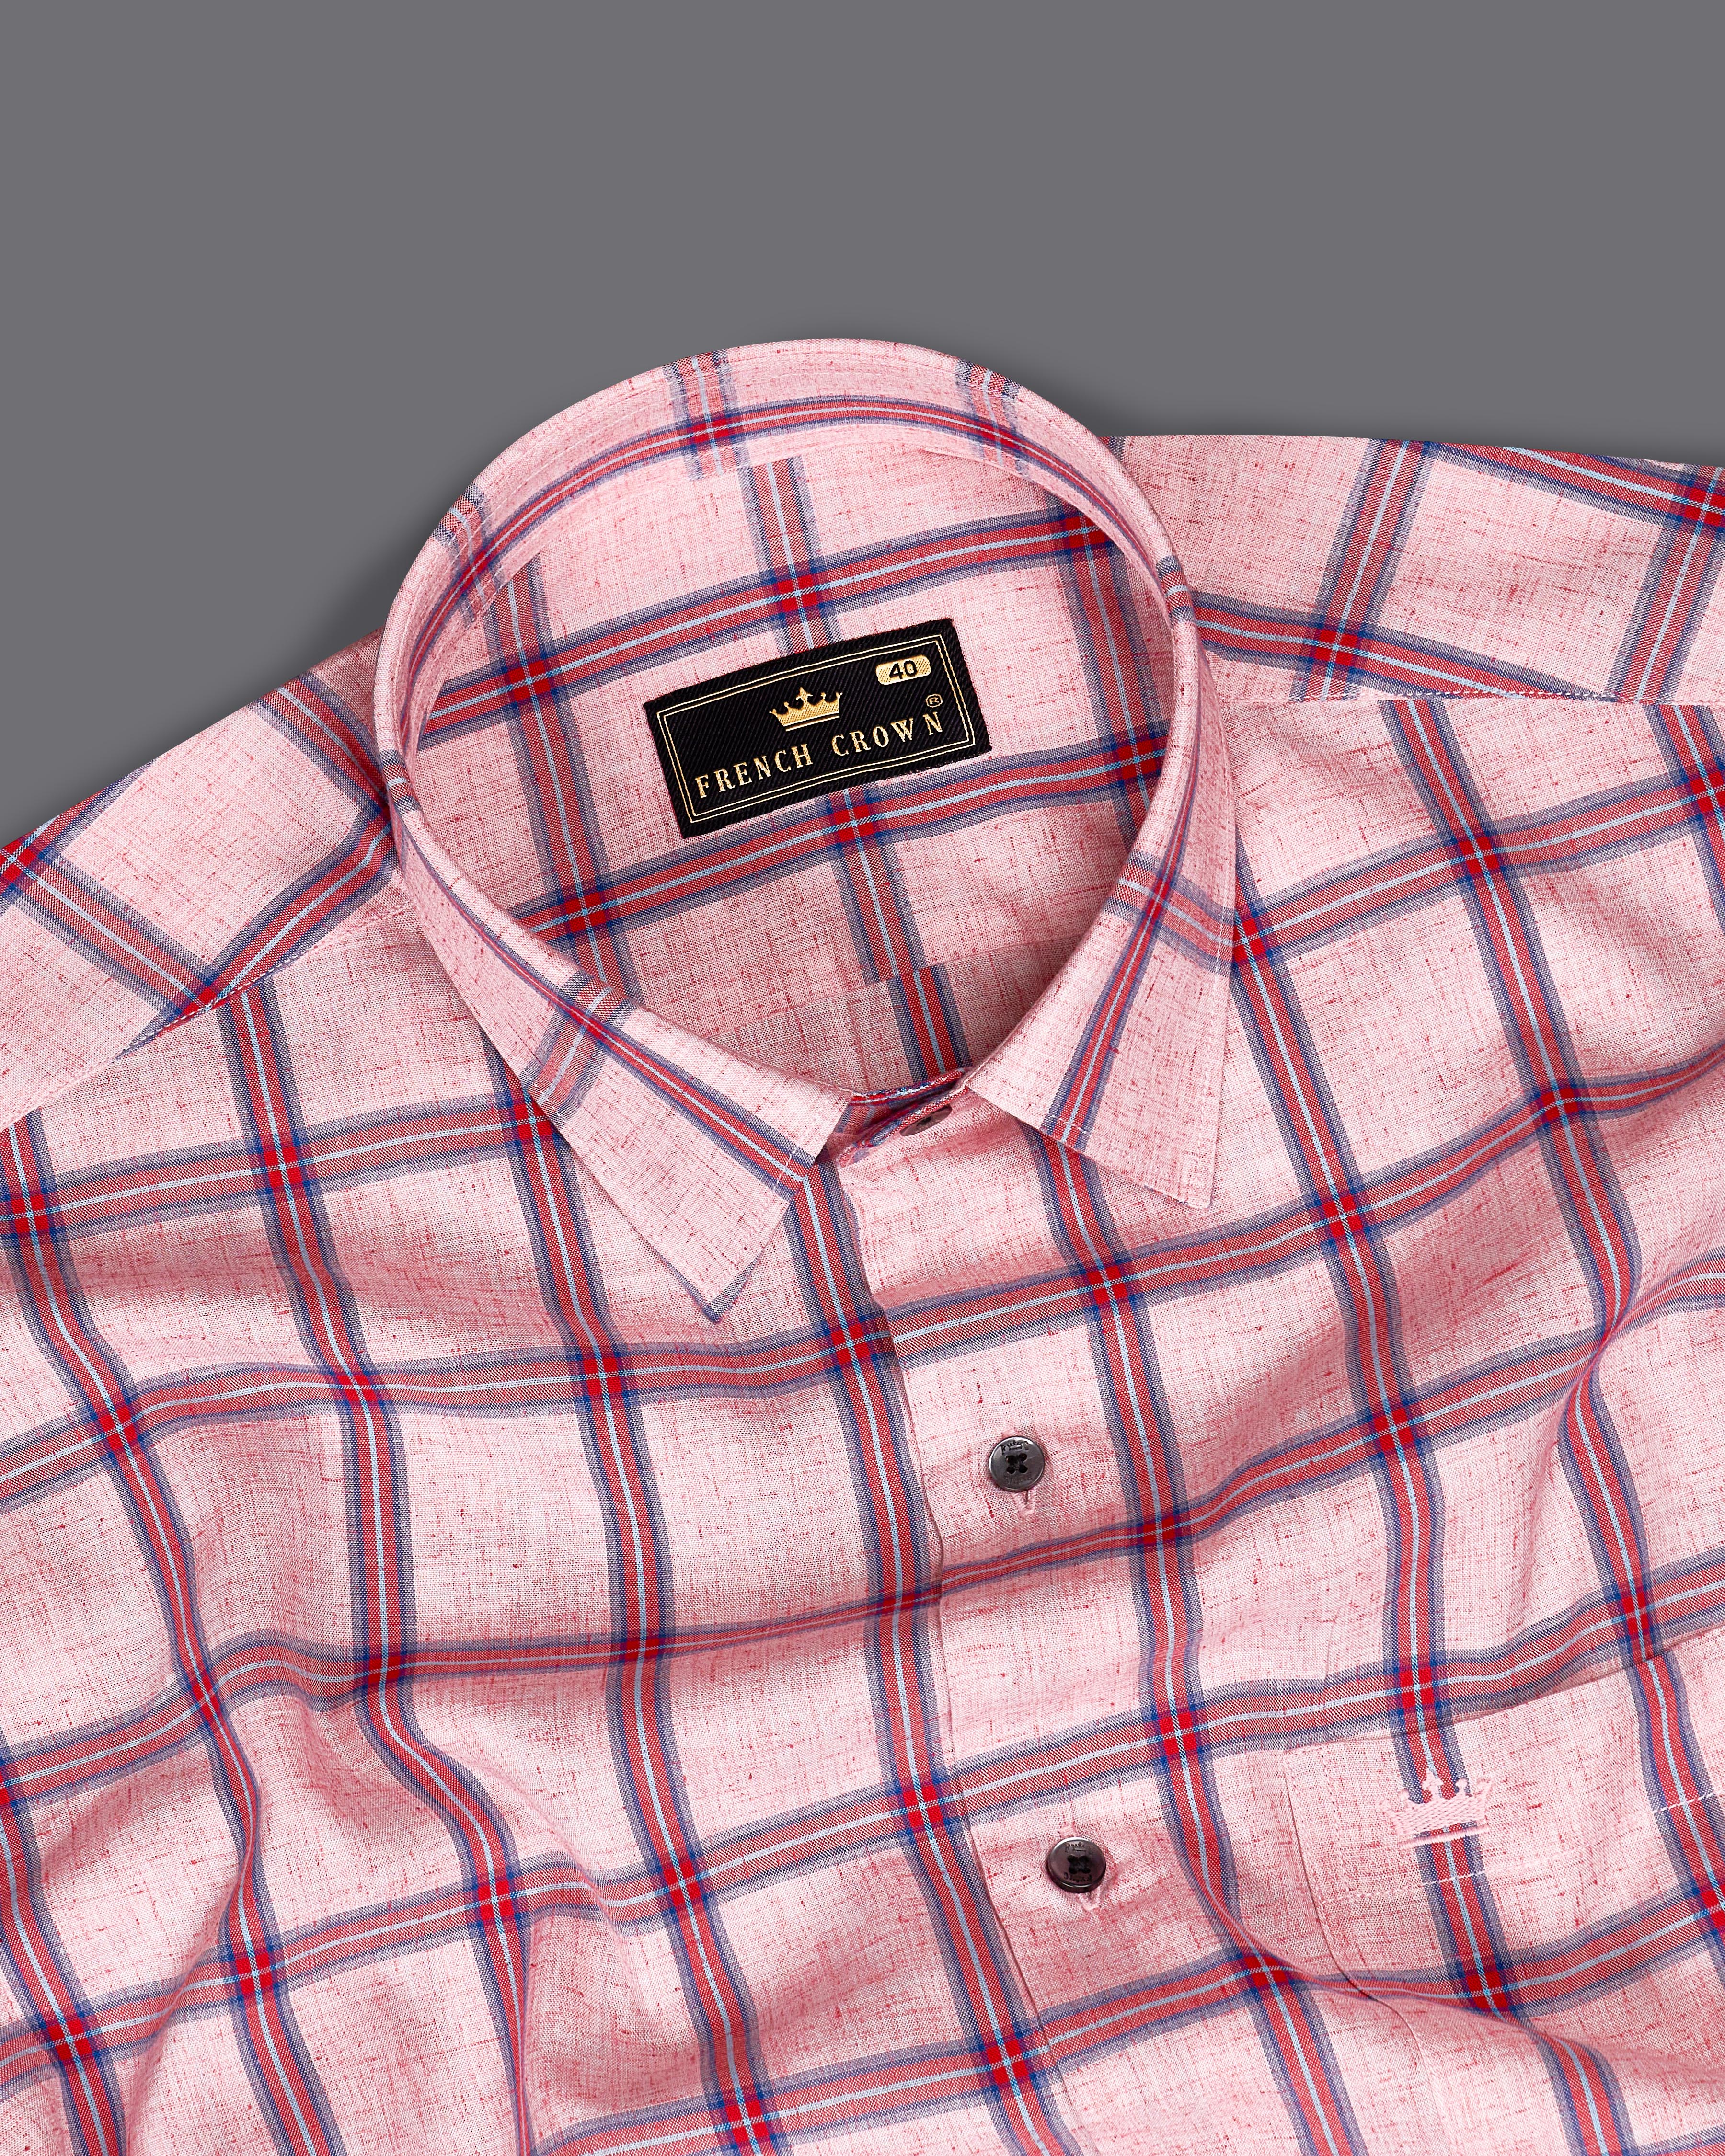 Oyster Pink with Cornell Pink Windowpane Premium Cotton Shirt 9051-BLK-38, 9051-BLK-H-38, 9051-BLK-39, 9051-BLK-H-39, 9051-BLK-40, 9051-BLK-H-40, 9051-BLK-42, 9051-BLK-H-42, 9051-BLK-44, 9051-BLK-H-44, 9051-BLK-46, 9051-BLK-H-46, 9051-BLK-48, 9051-BLK-H-48, 9051-BLK-50, 9051-BLK-H-50, 9051-BLK-52, 9051-BLK-H-52